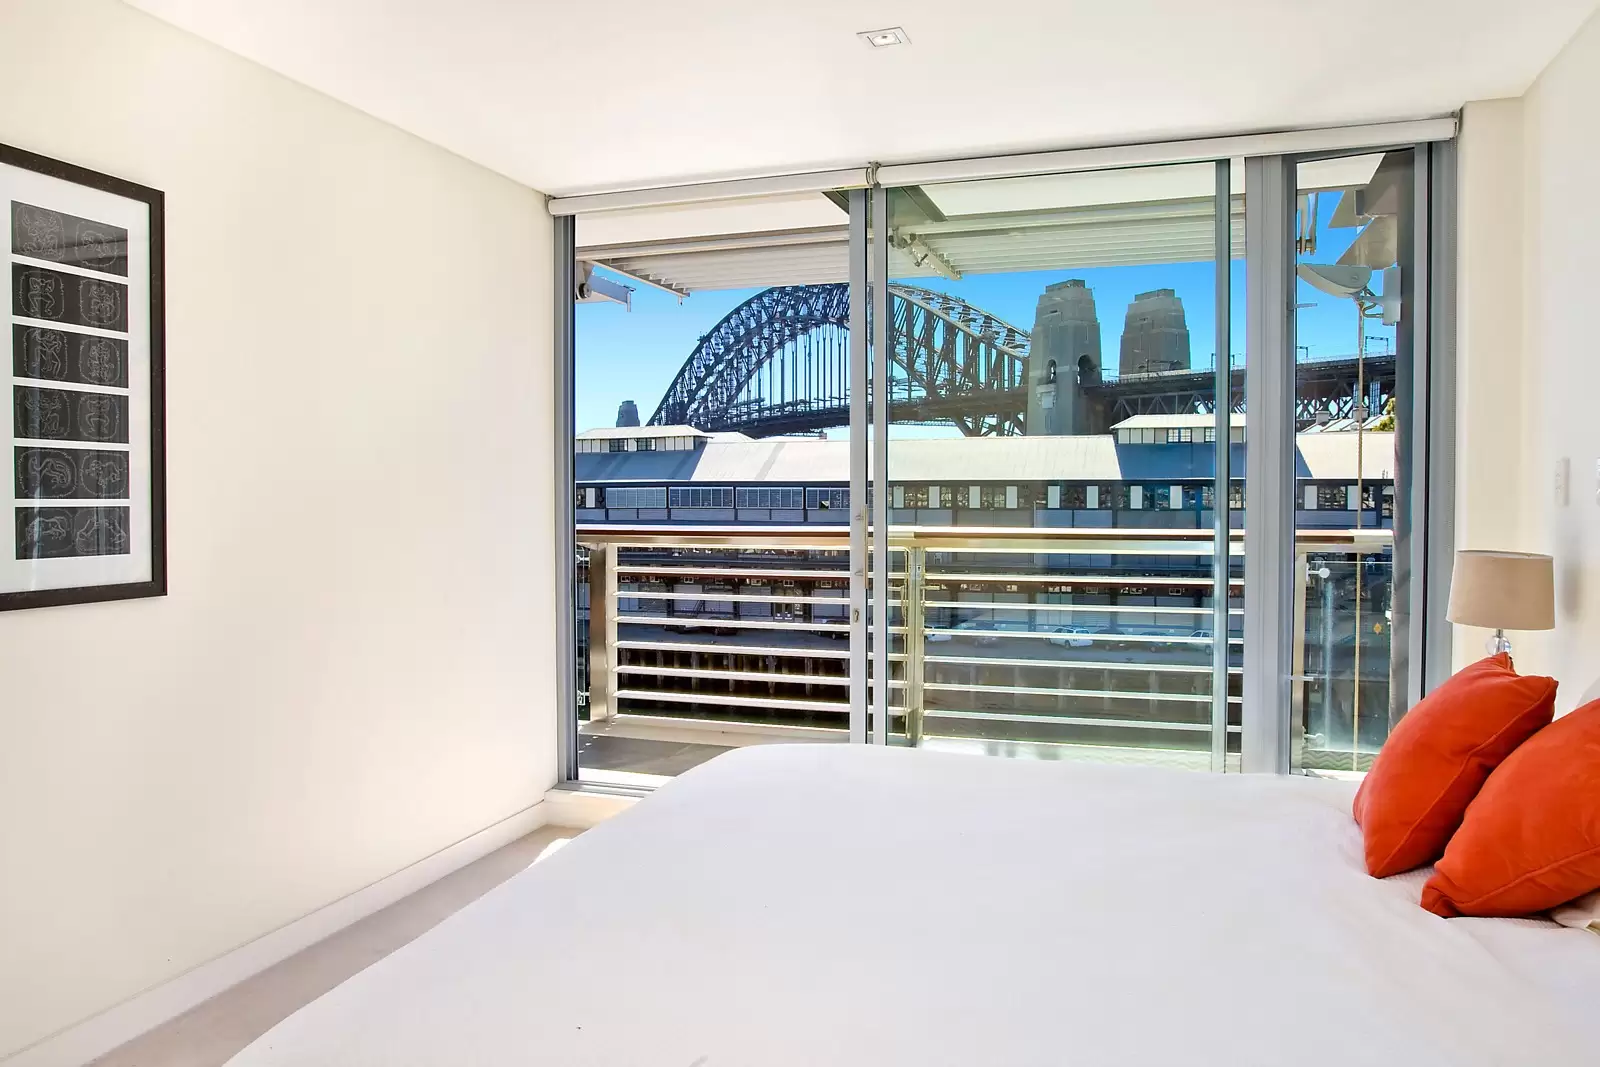 Photo #4: 511/19 Hickson Road, Walsh Bay - Sold by Sydney Sotheby's International Realty